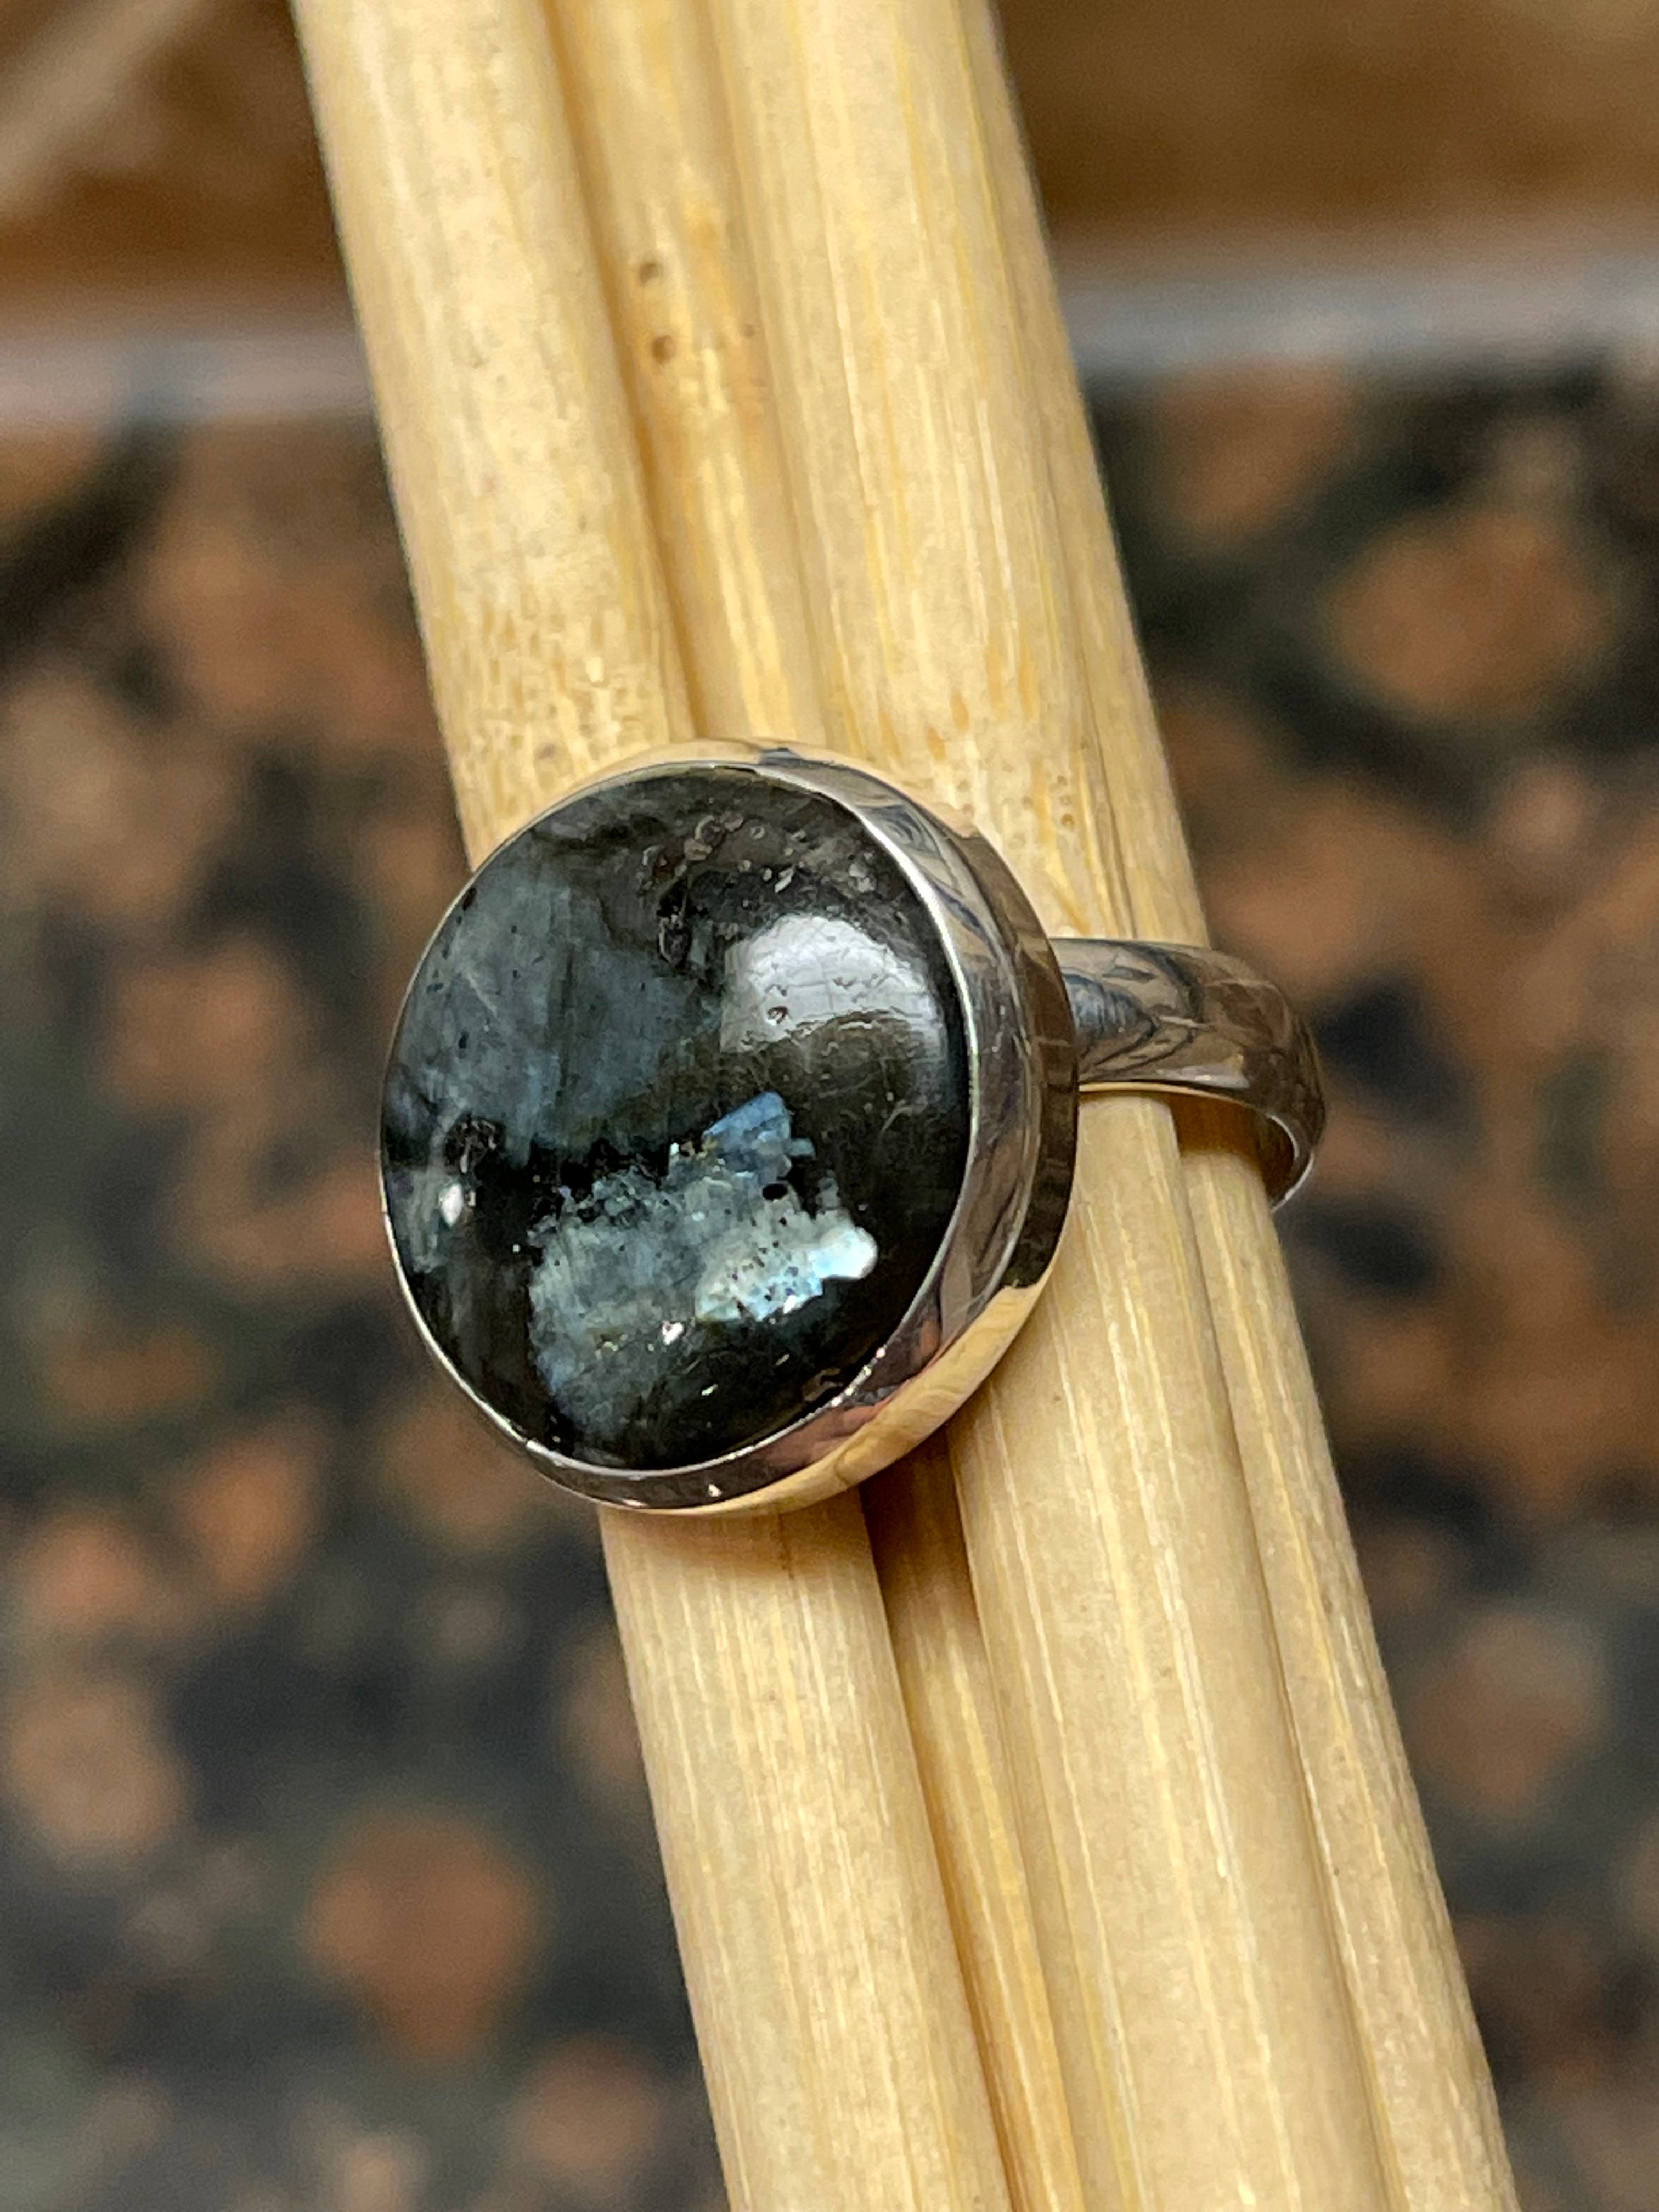 Black Tourmaline Engagement Ring, Raw Moonstone Wedding Ring, Moonstone Ring  Set, Raw Gemstone Ring, Raw Stone Ring, Gift for Her - Etsy